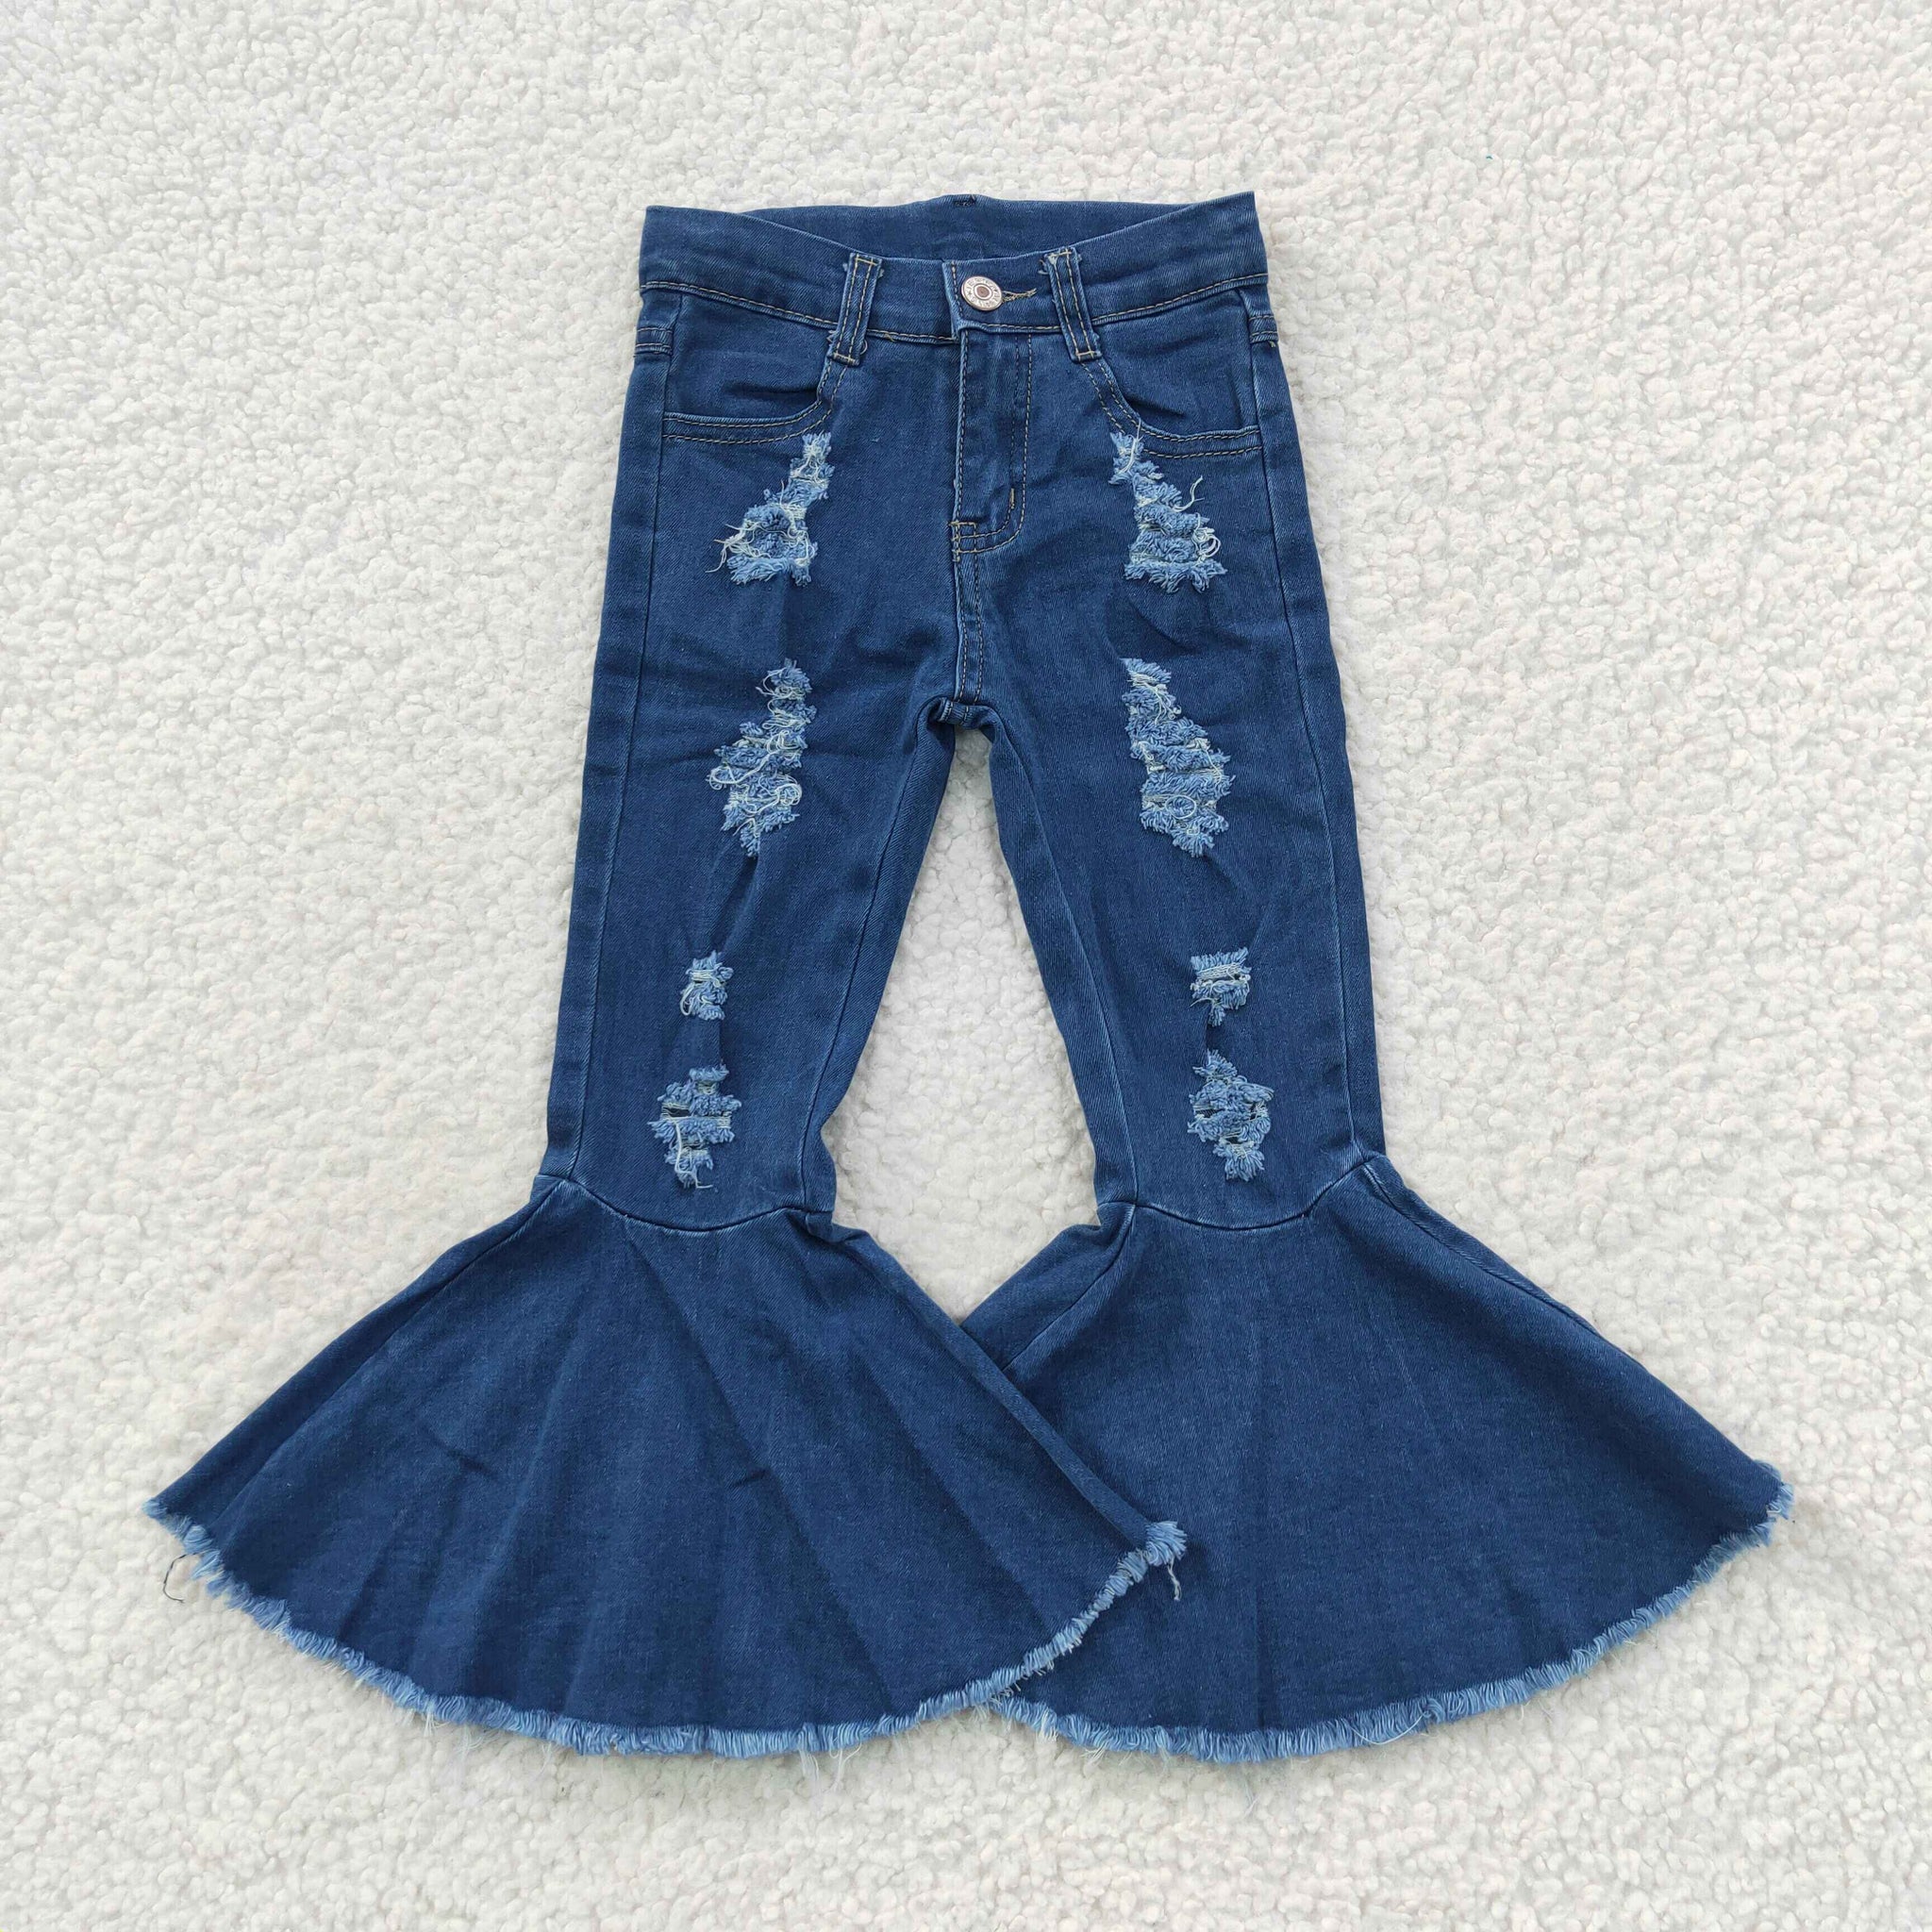 Trendy looks Girl's Denim Bell Bottom Jeans, solid Bottom, Trendy Look in  Different Shades, Comfortable Women's